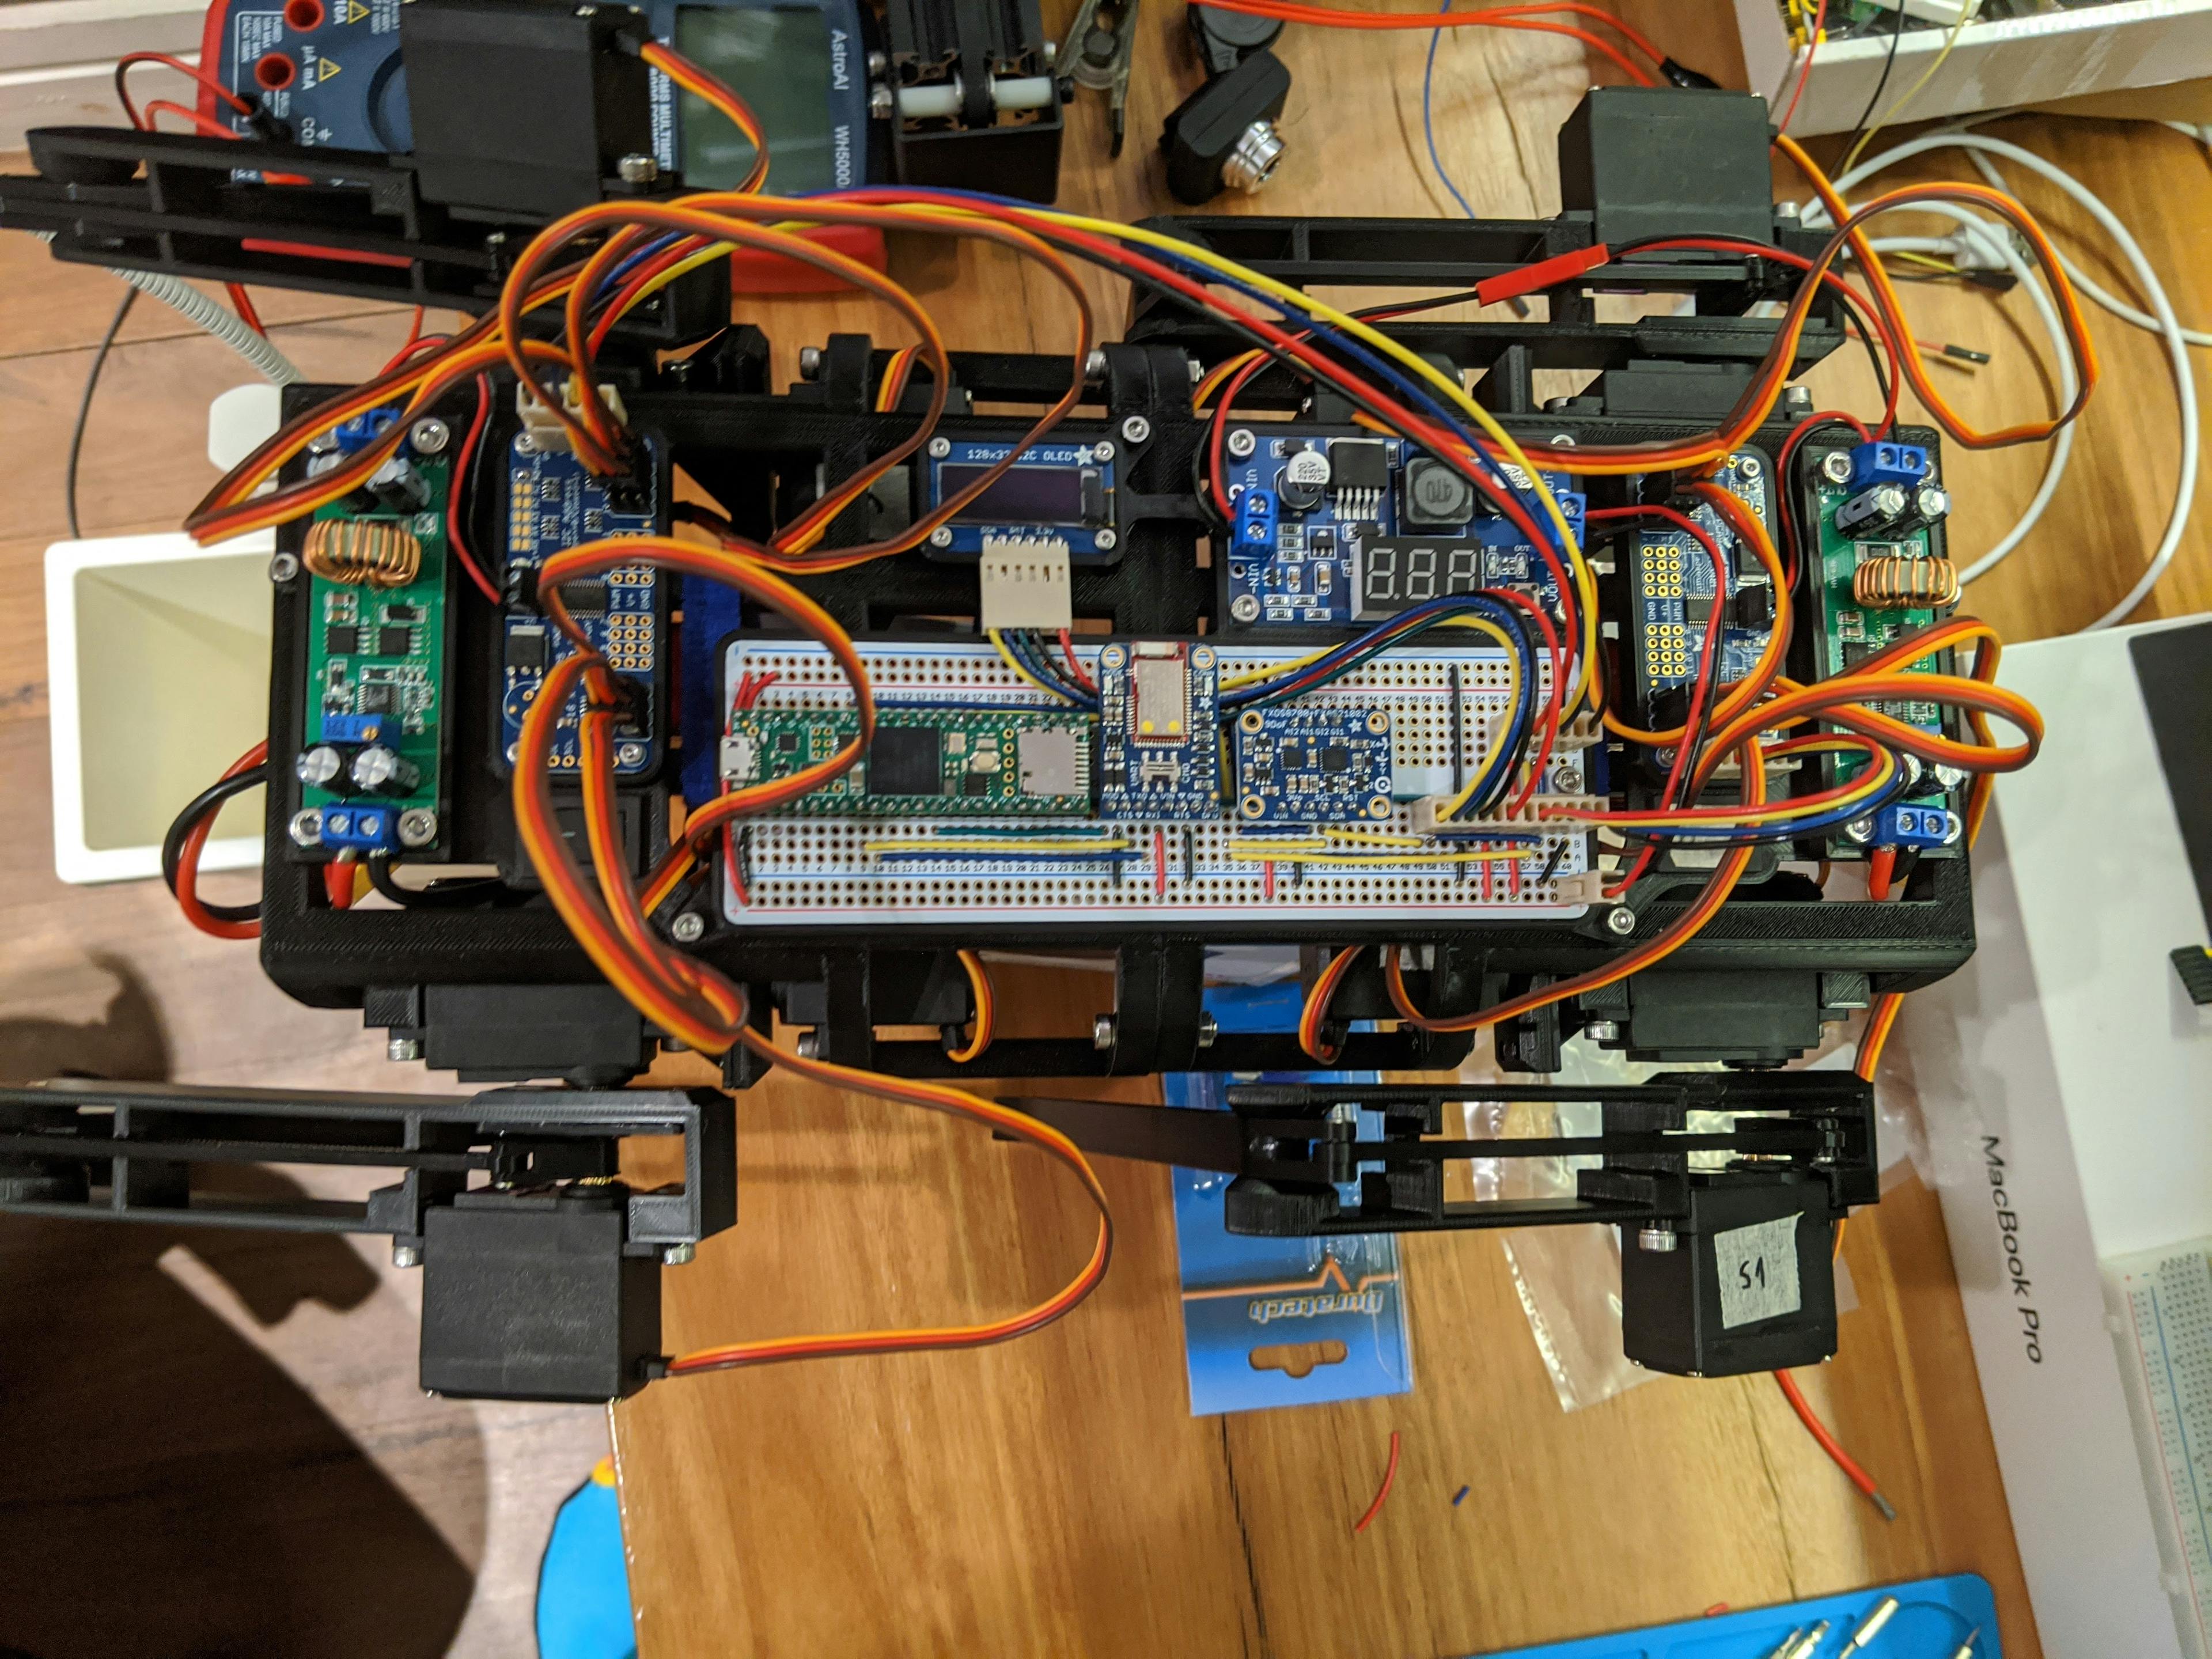 Top-down view of the quadruped. Cat-sized, 3D printed, black frame on which 9 PCBs are mounted interconnected with various colorful cables.